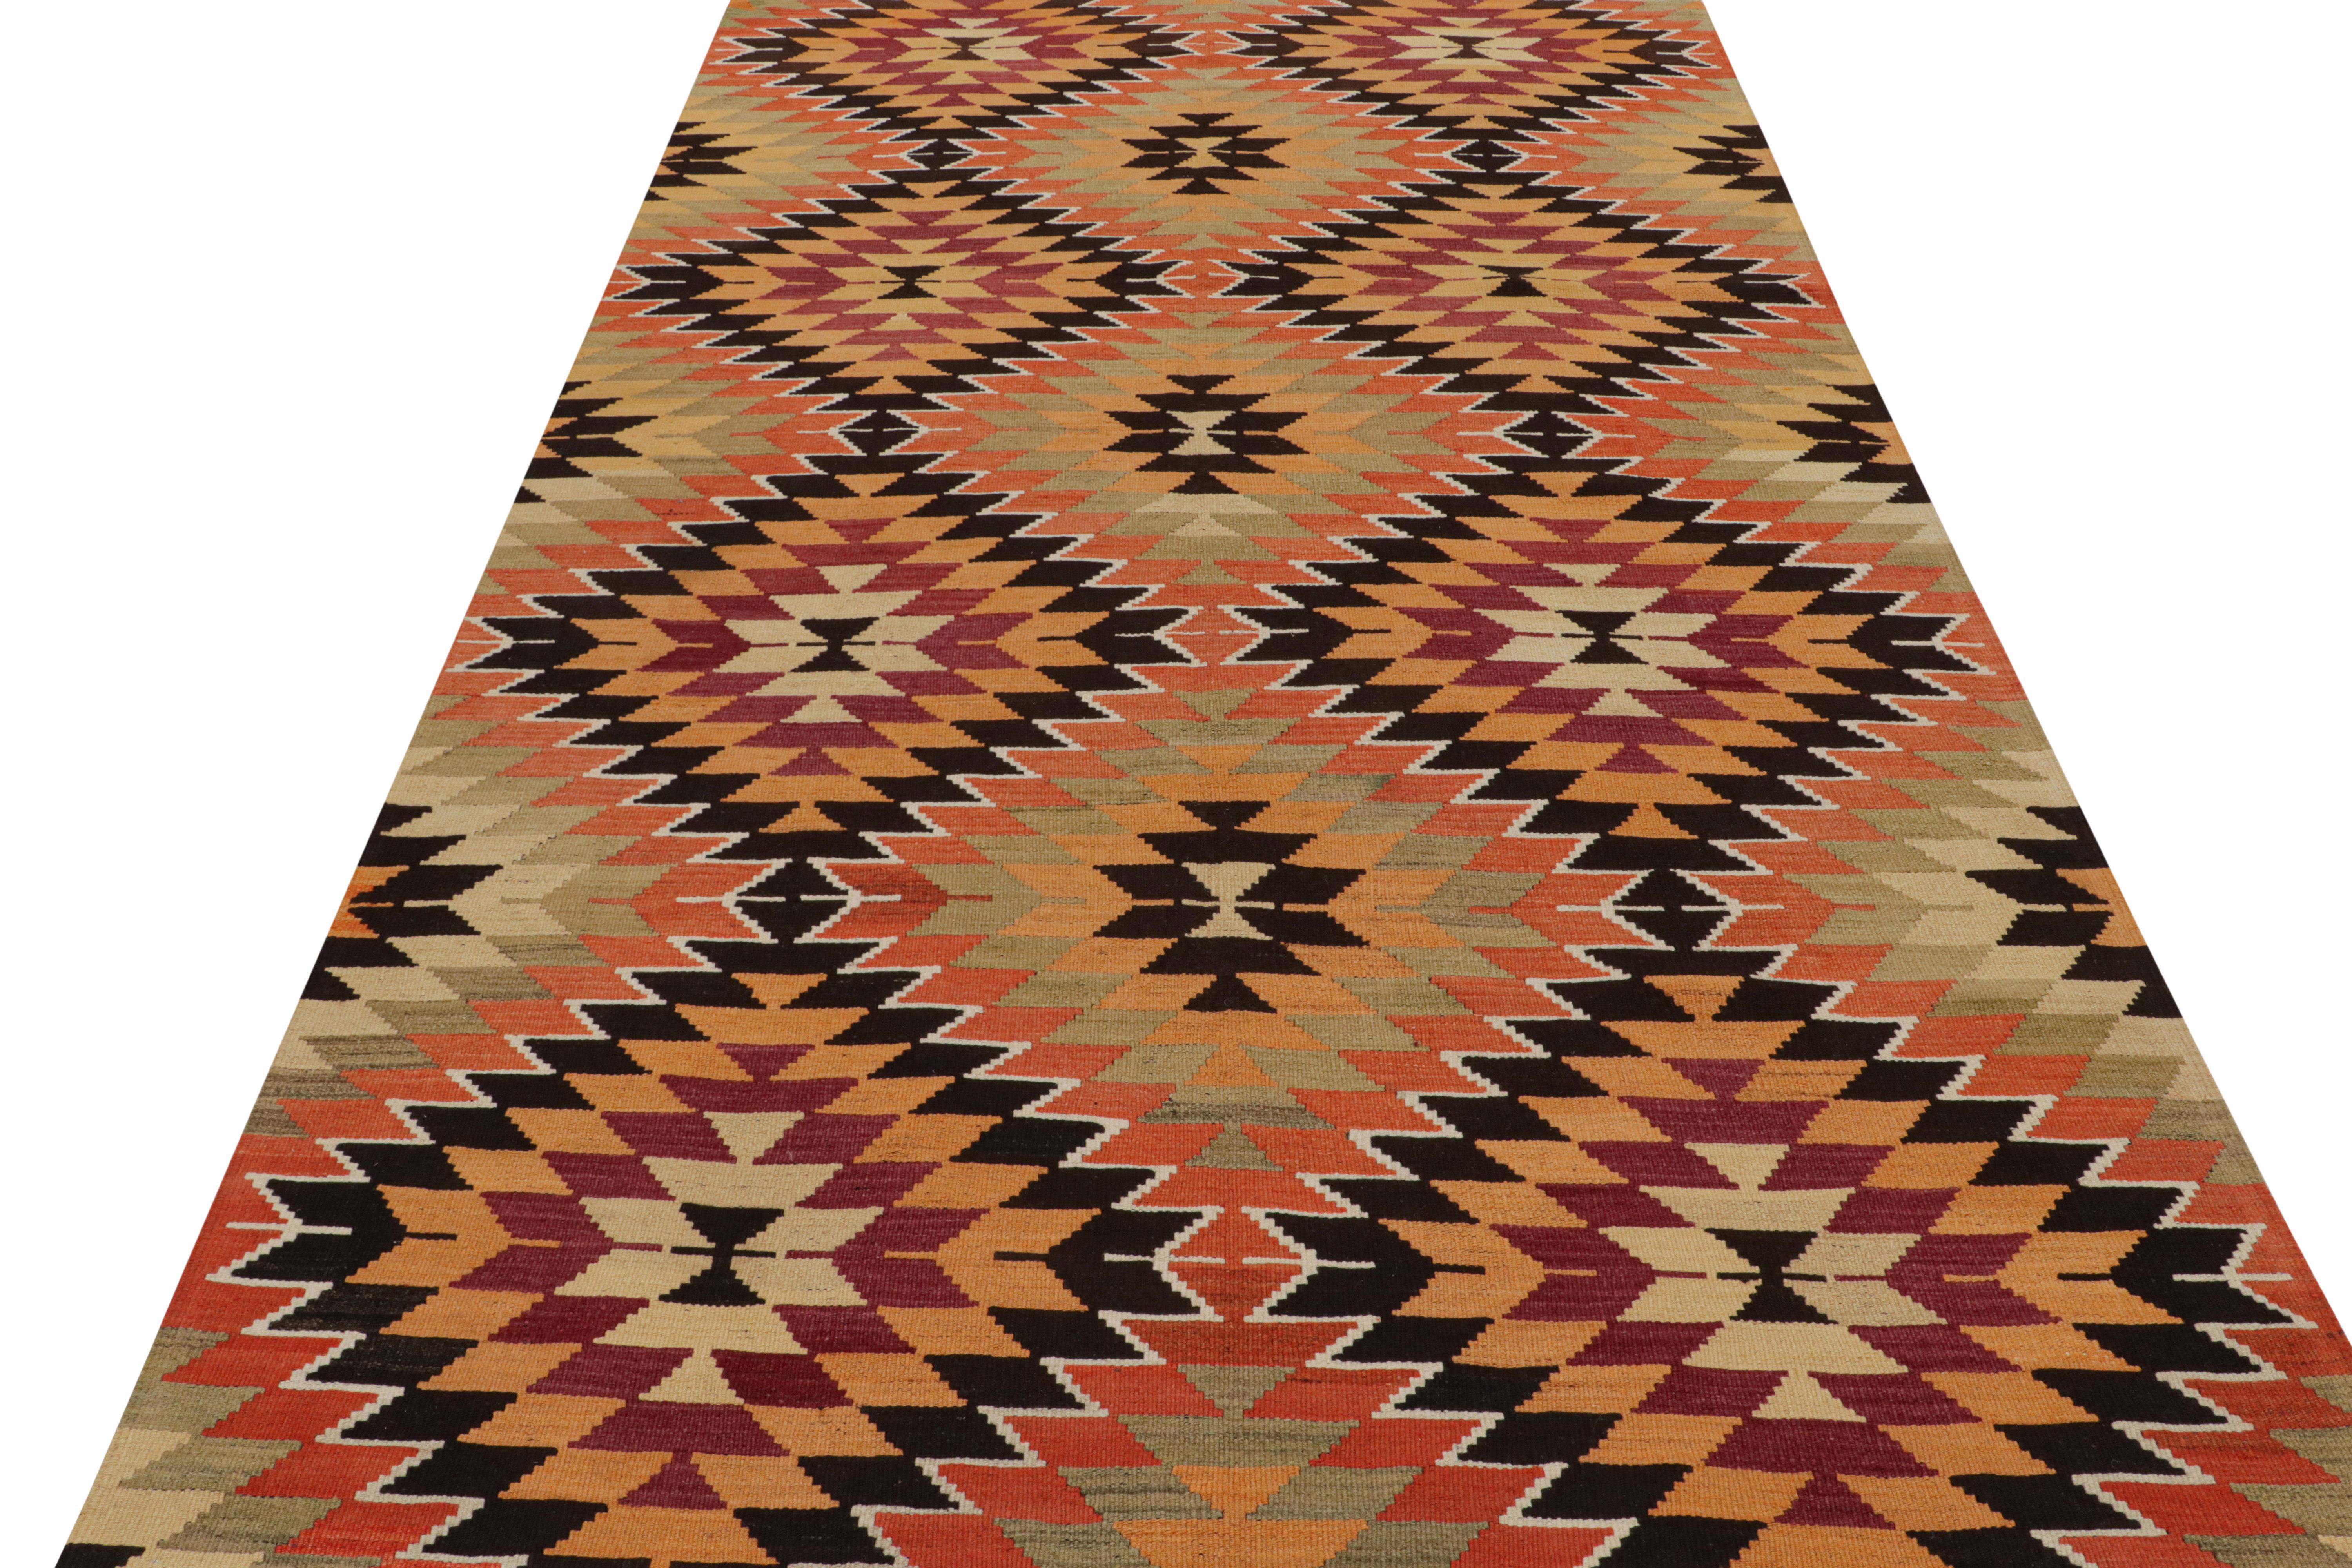 Vintage Midcentury Mut Geometric Green Orange Wool Kilim Rug by Rug & Kilim In Good Condition For Sale In Long Island City, NY